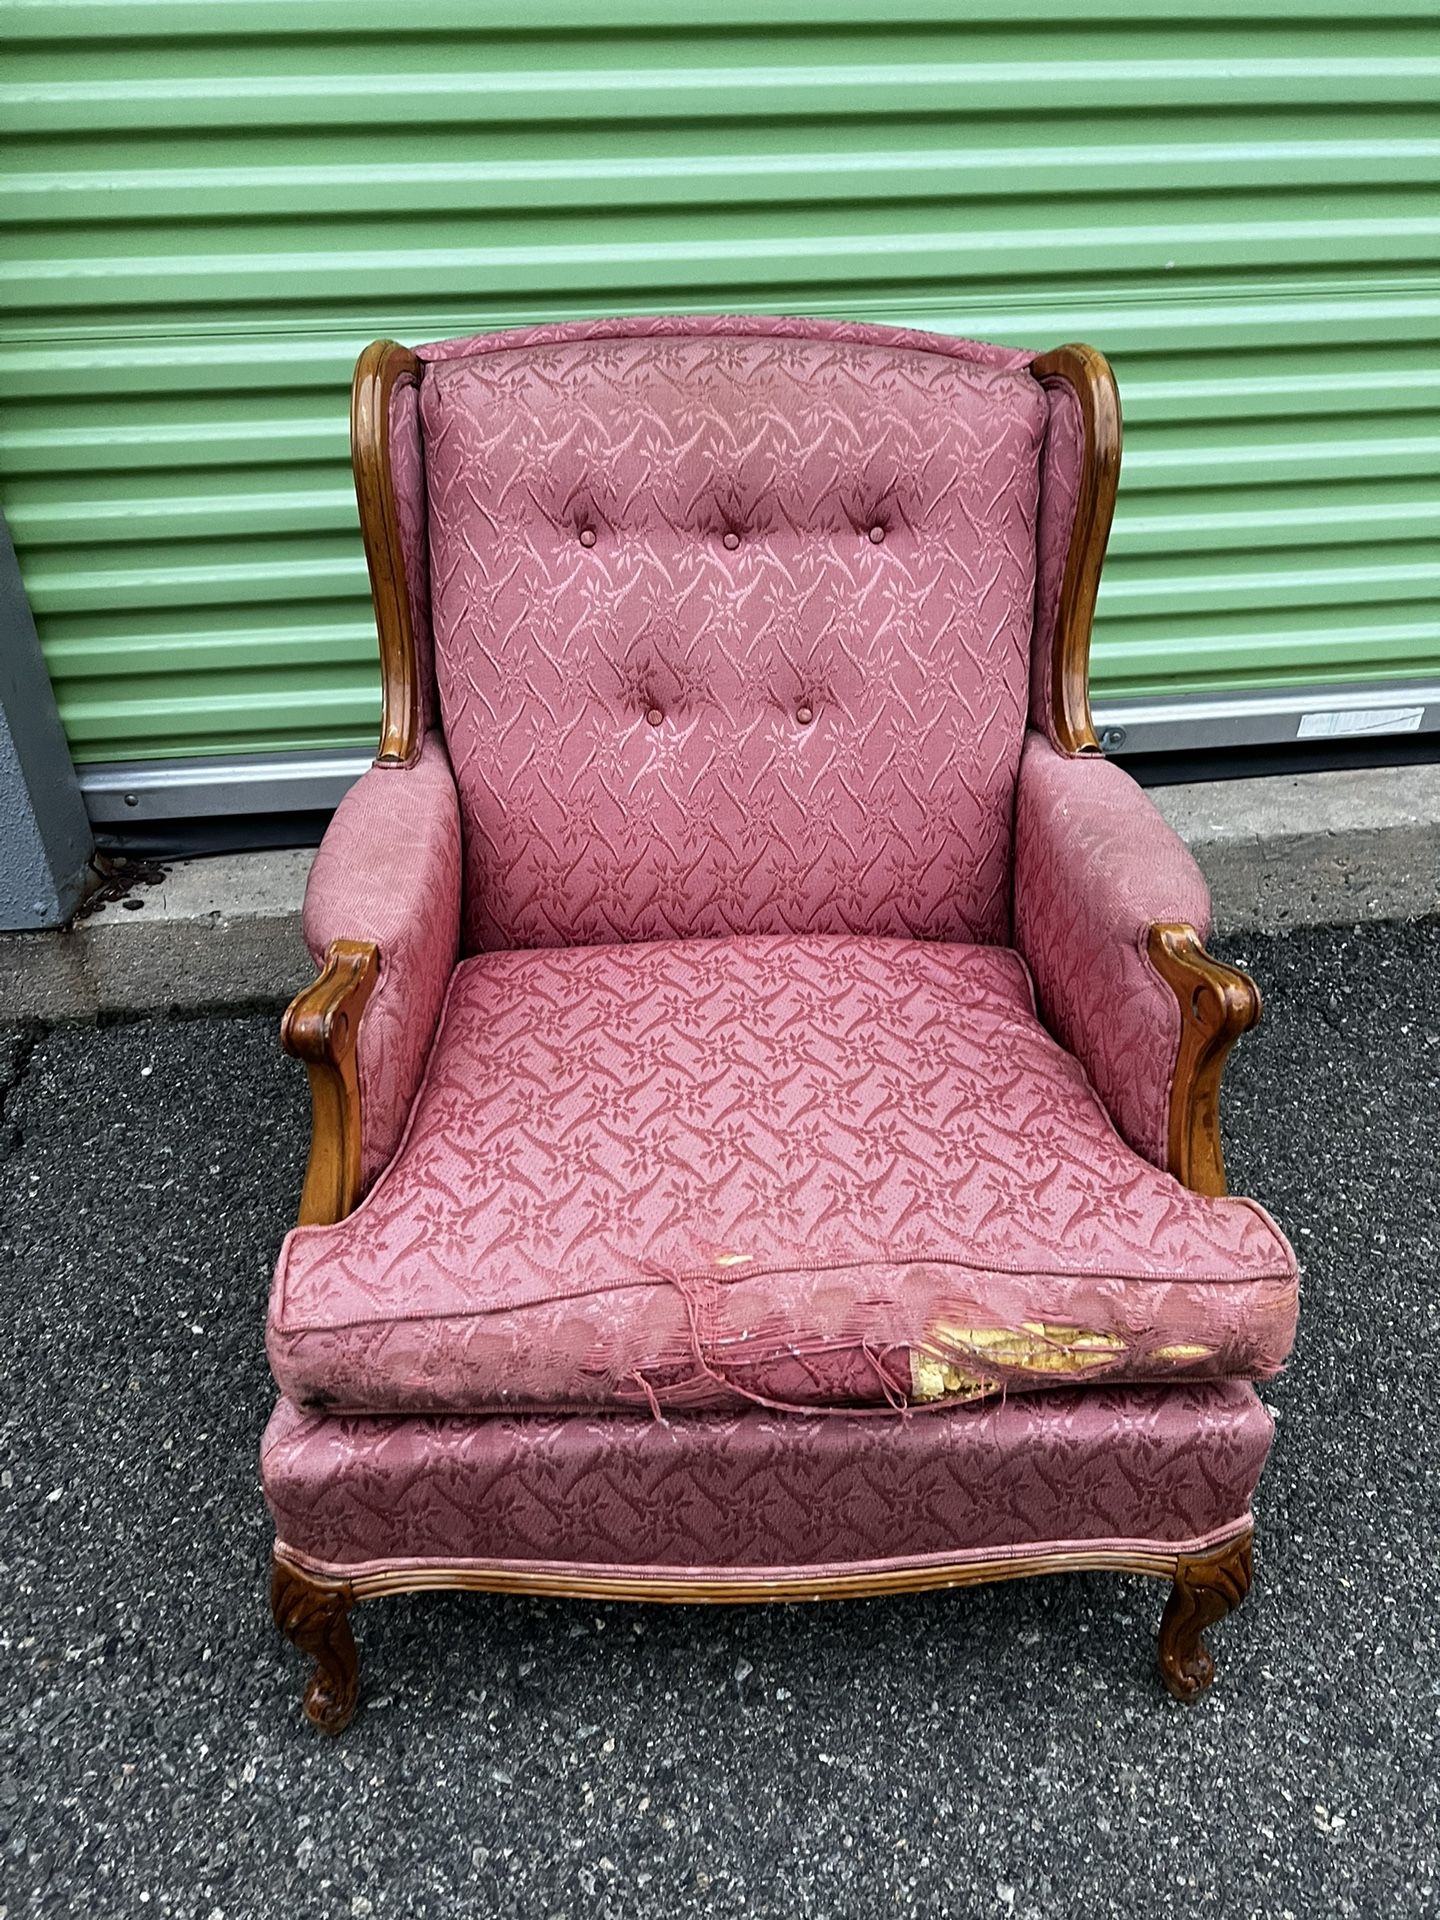 Broyill Chair From Prop House